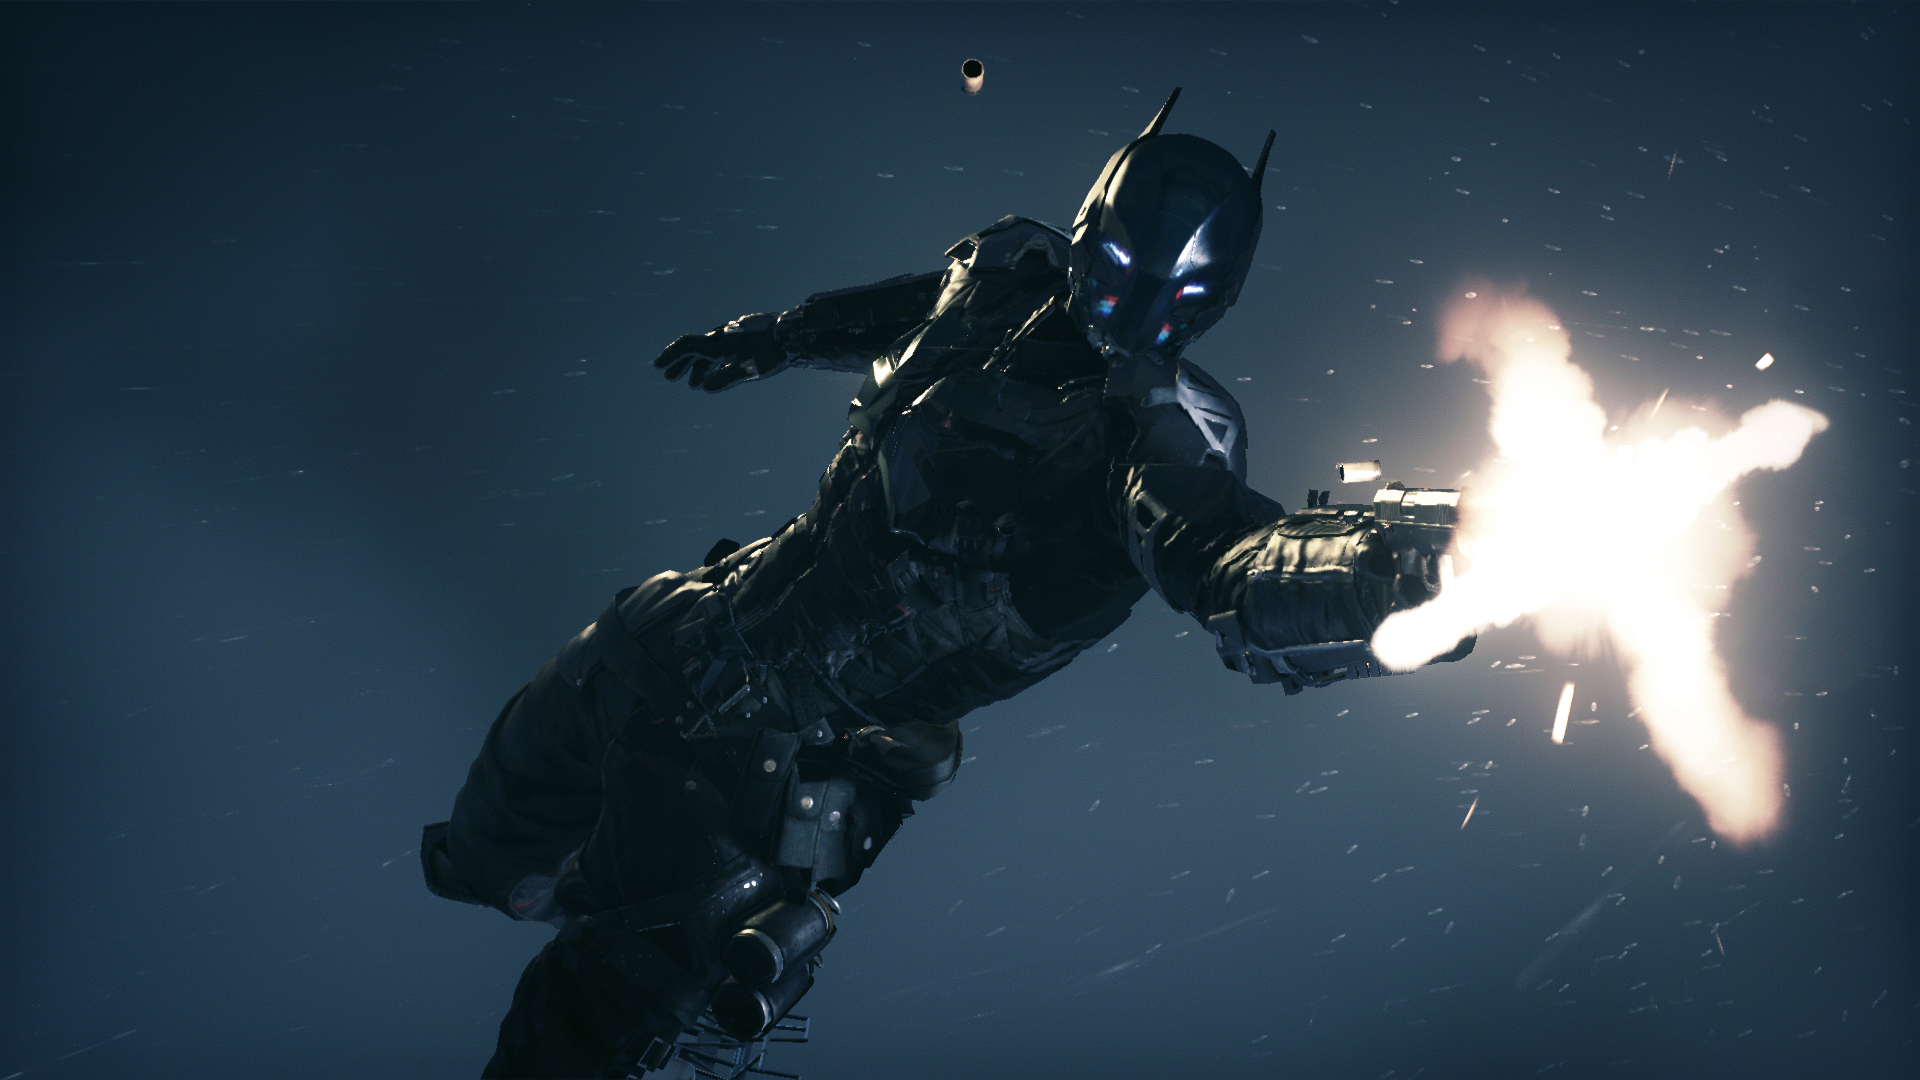 Rocksteady on Ending Batman Arkham Trilogy: “We've Done All We Can Do Here